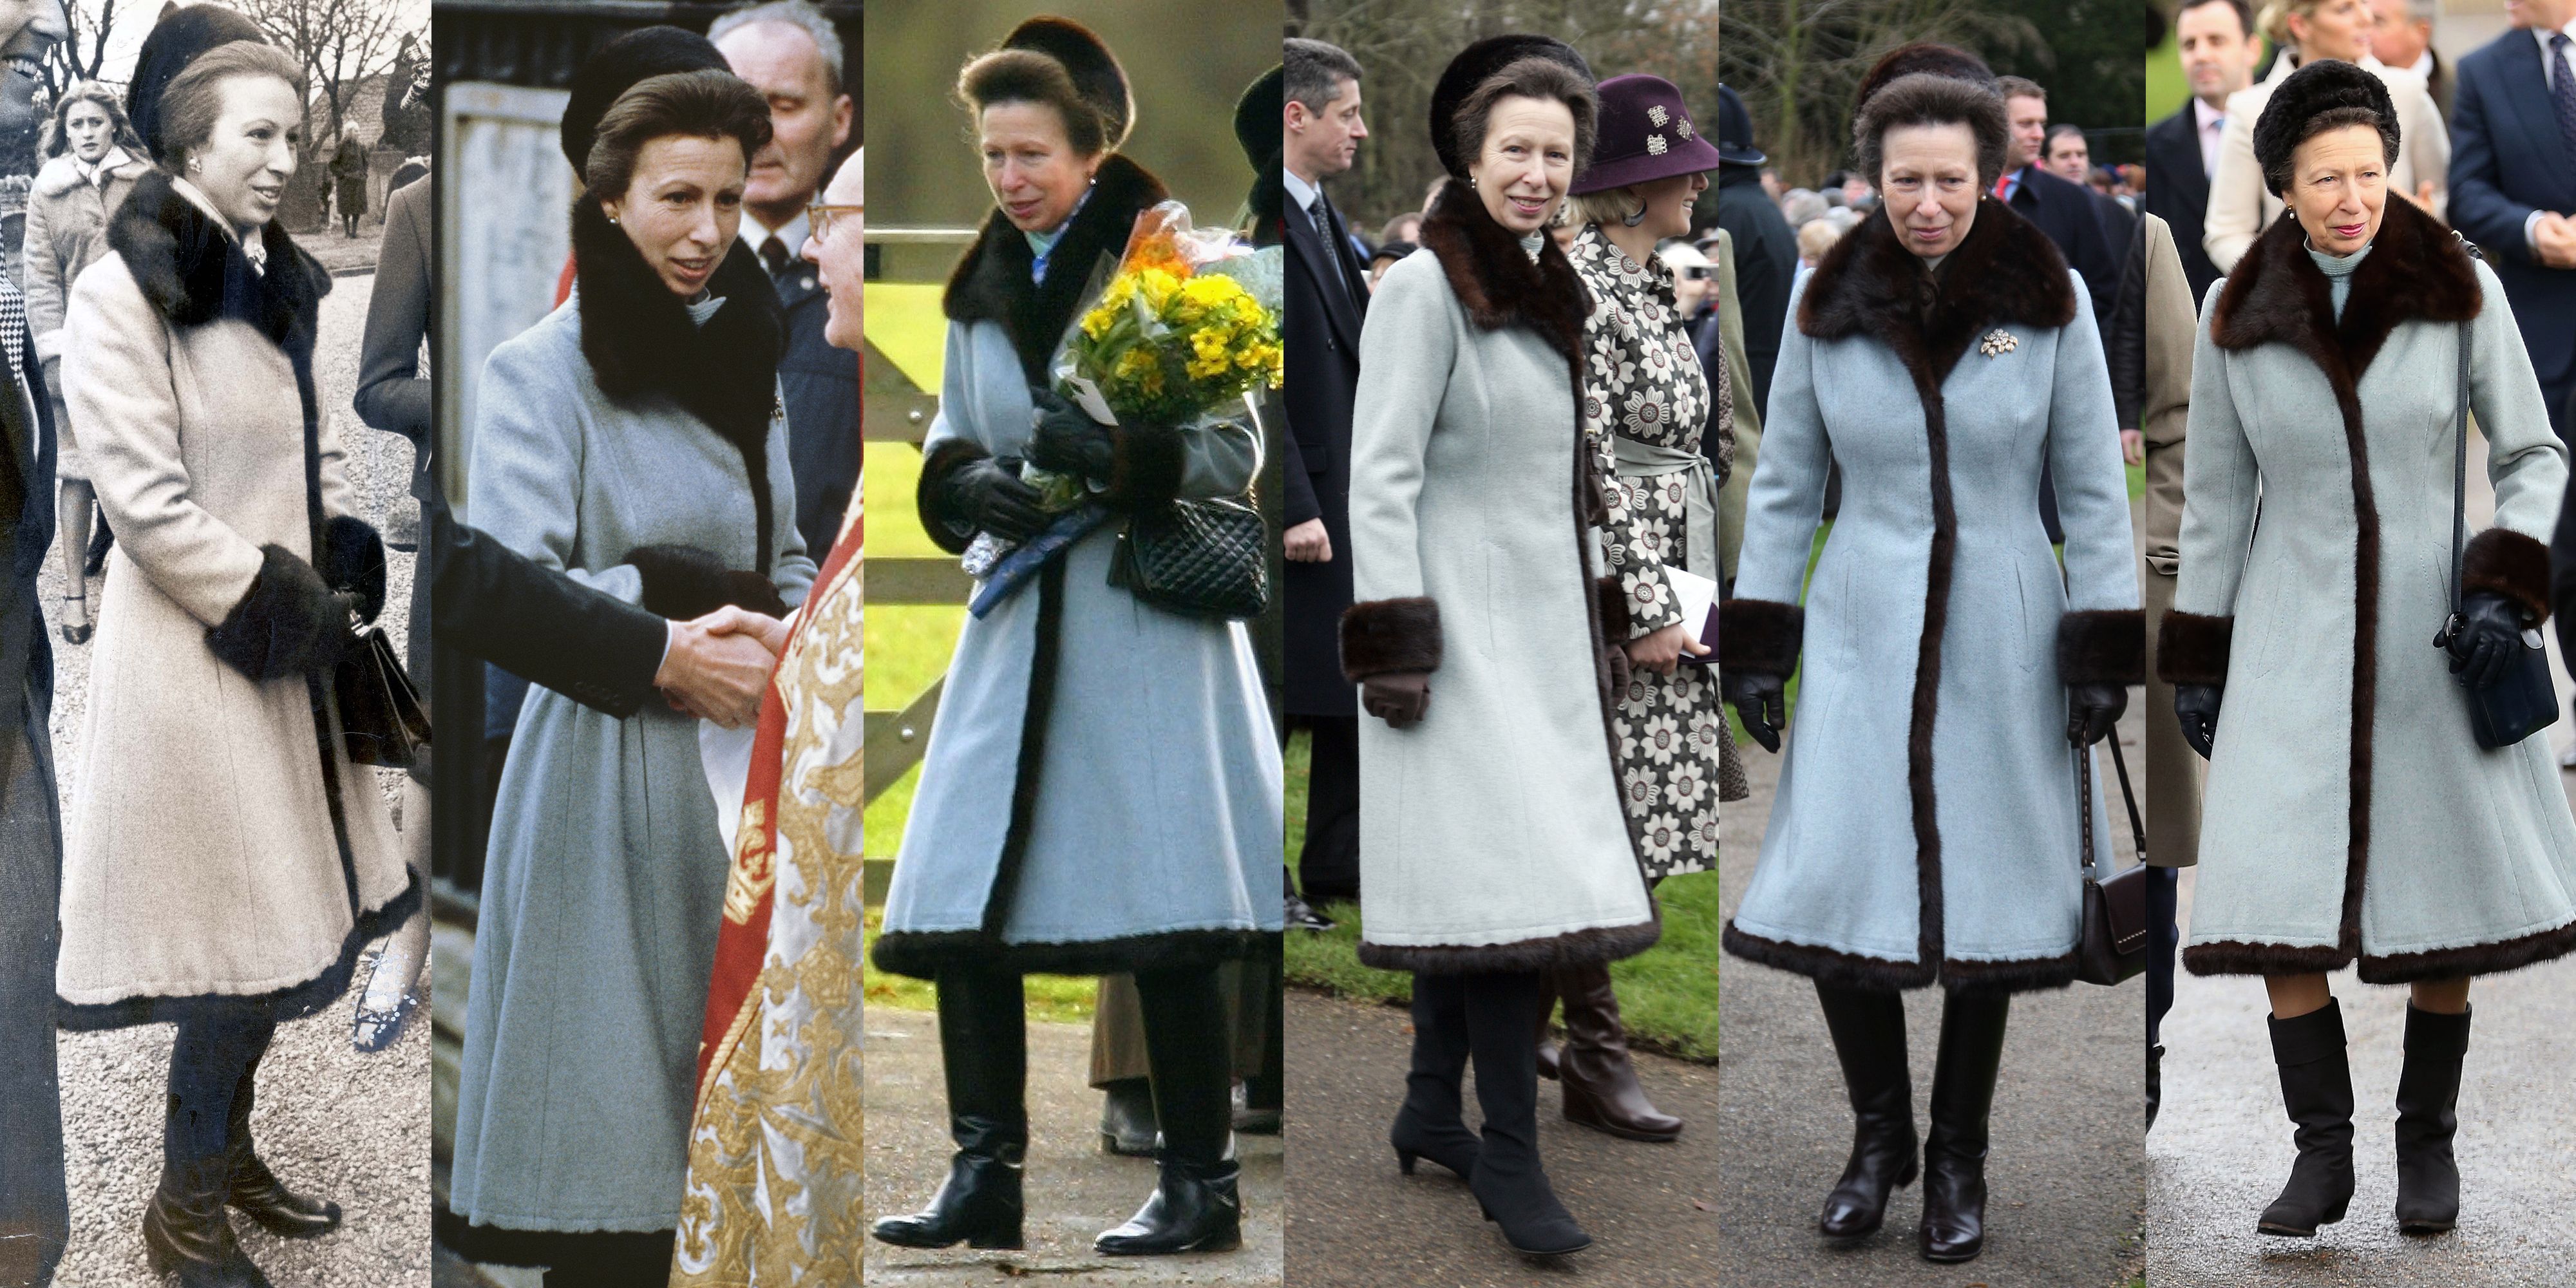 Princess Anne's Repeat Outfits - Princess Anne Rewearing Clothes